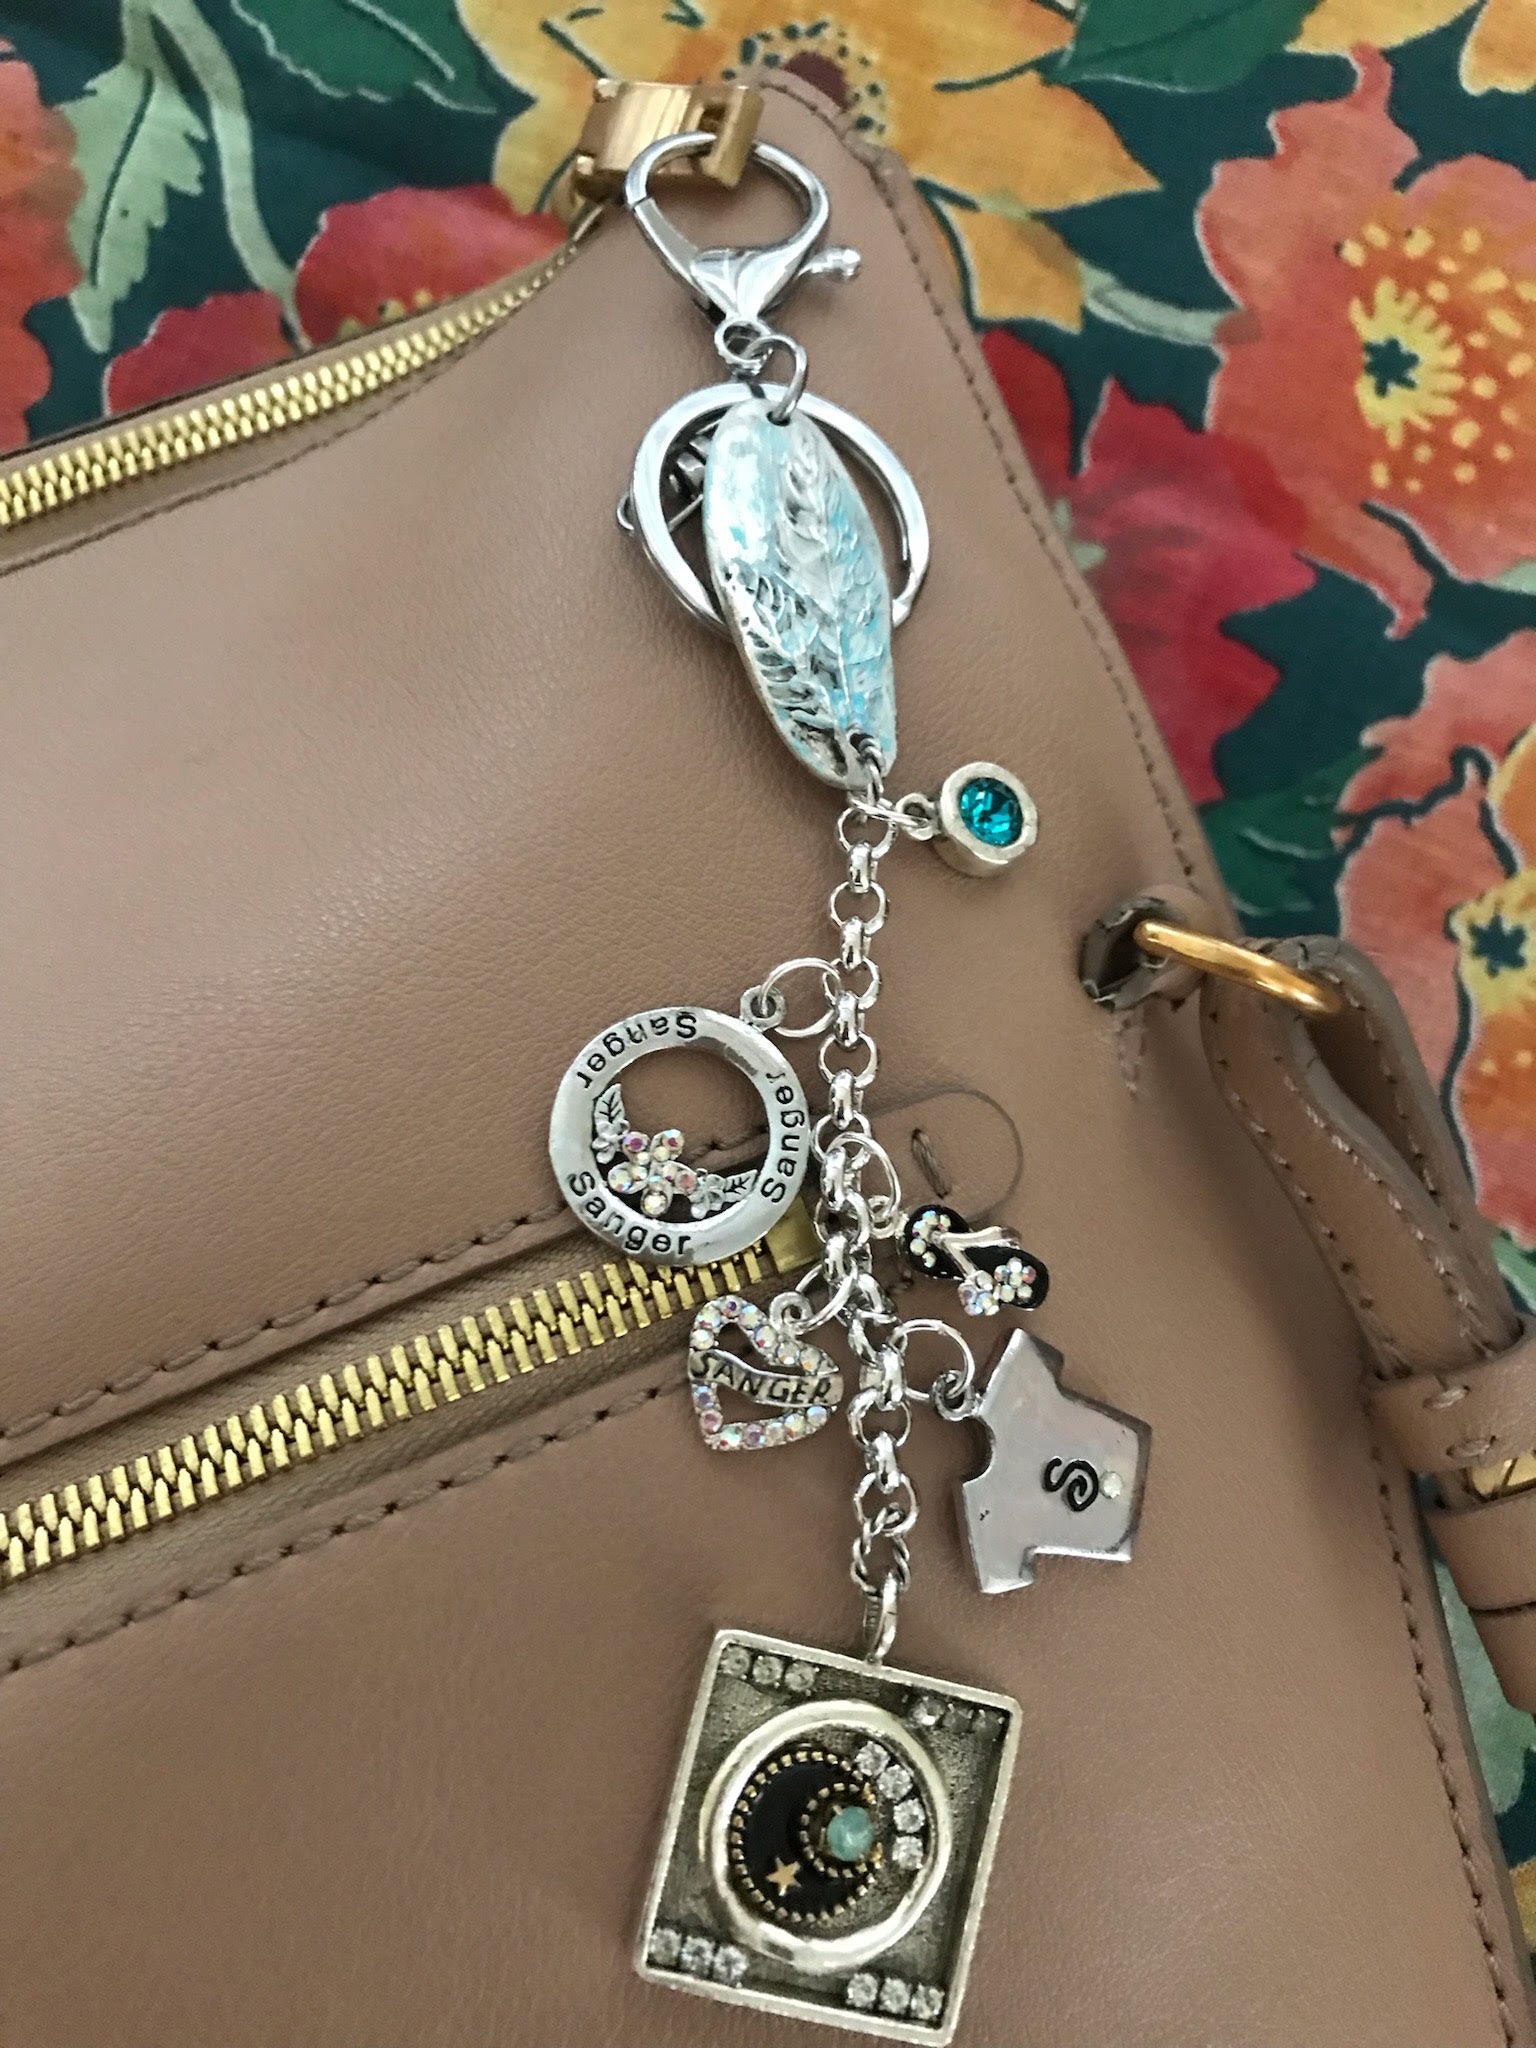 purse with charms